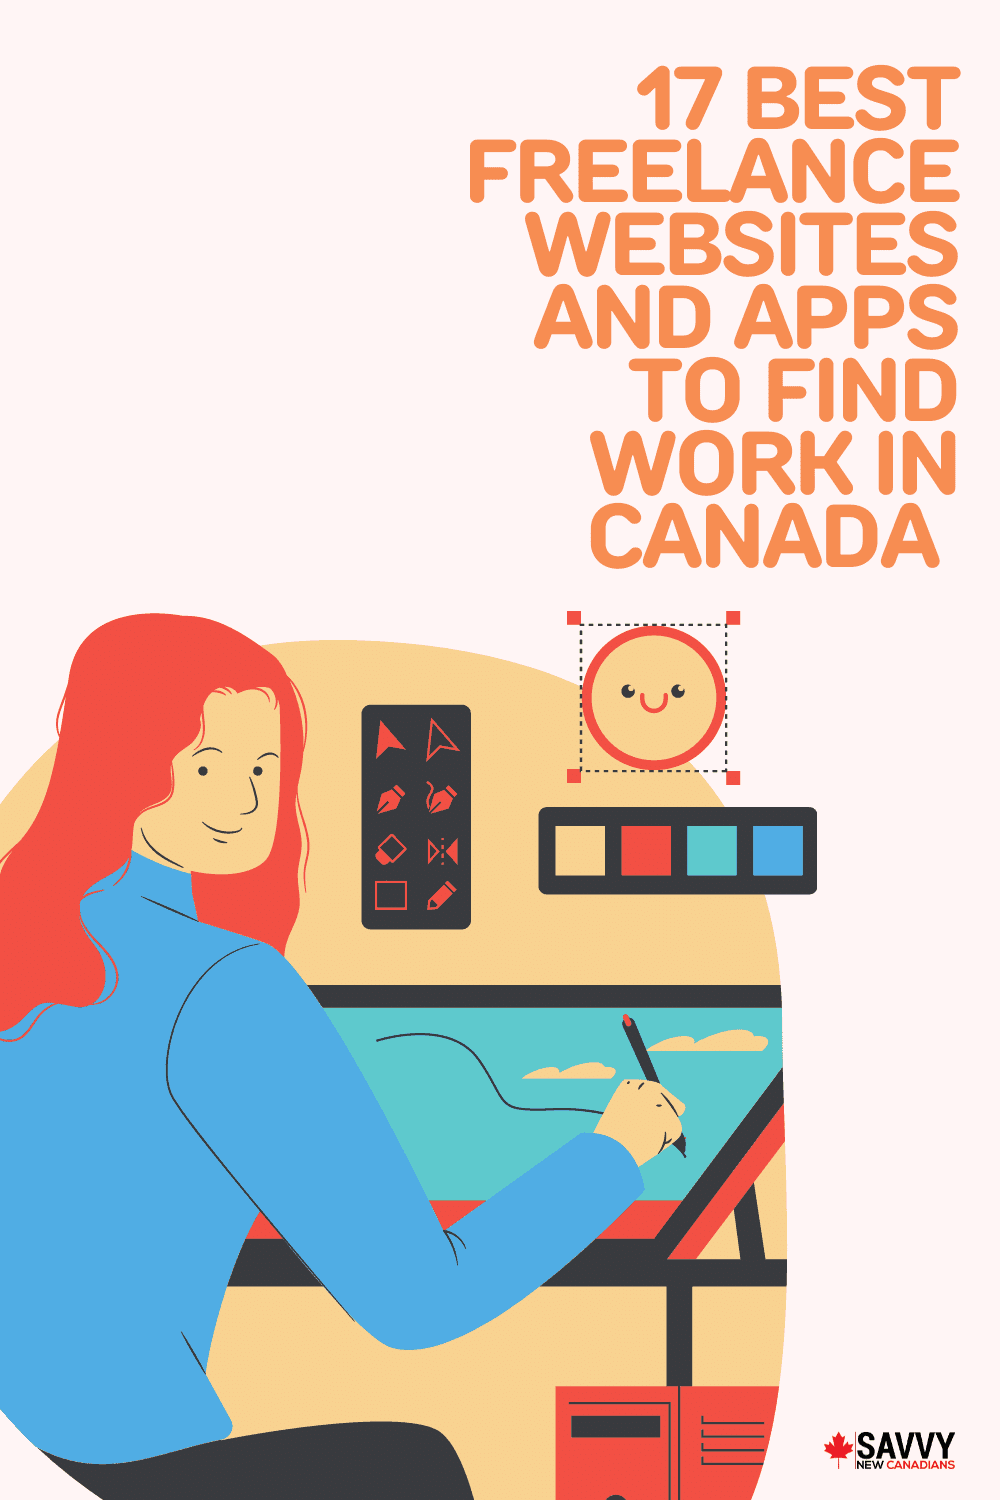 17 Best Freelance Websites and Apps To Find Work in Canada in 2022